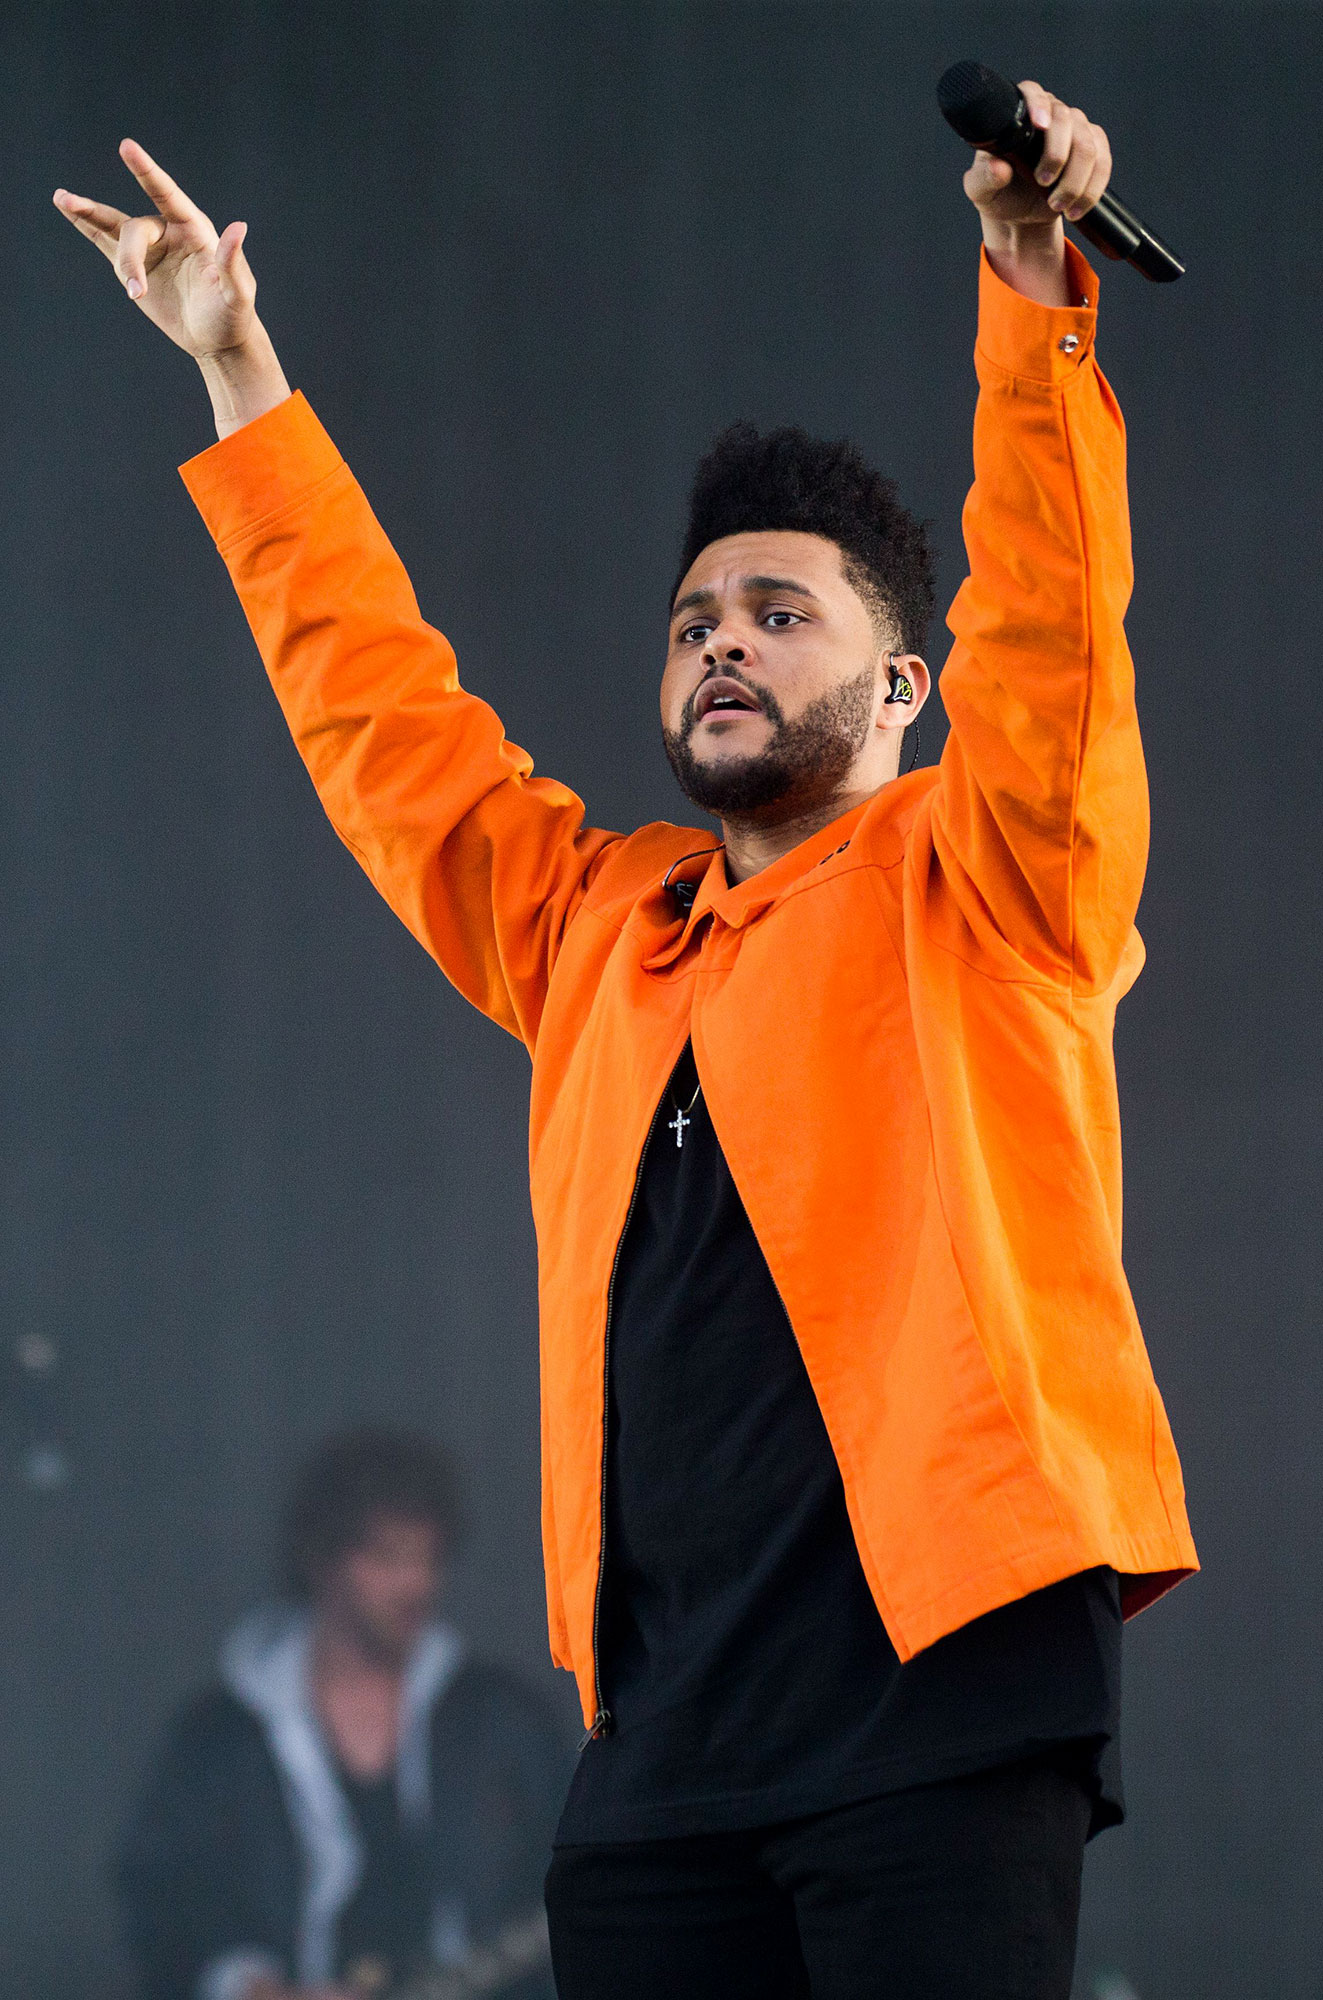 Keeping Things PG Everything The Weeknd Has Said About His Super Bowl 2021 Halftime Show